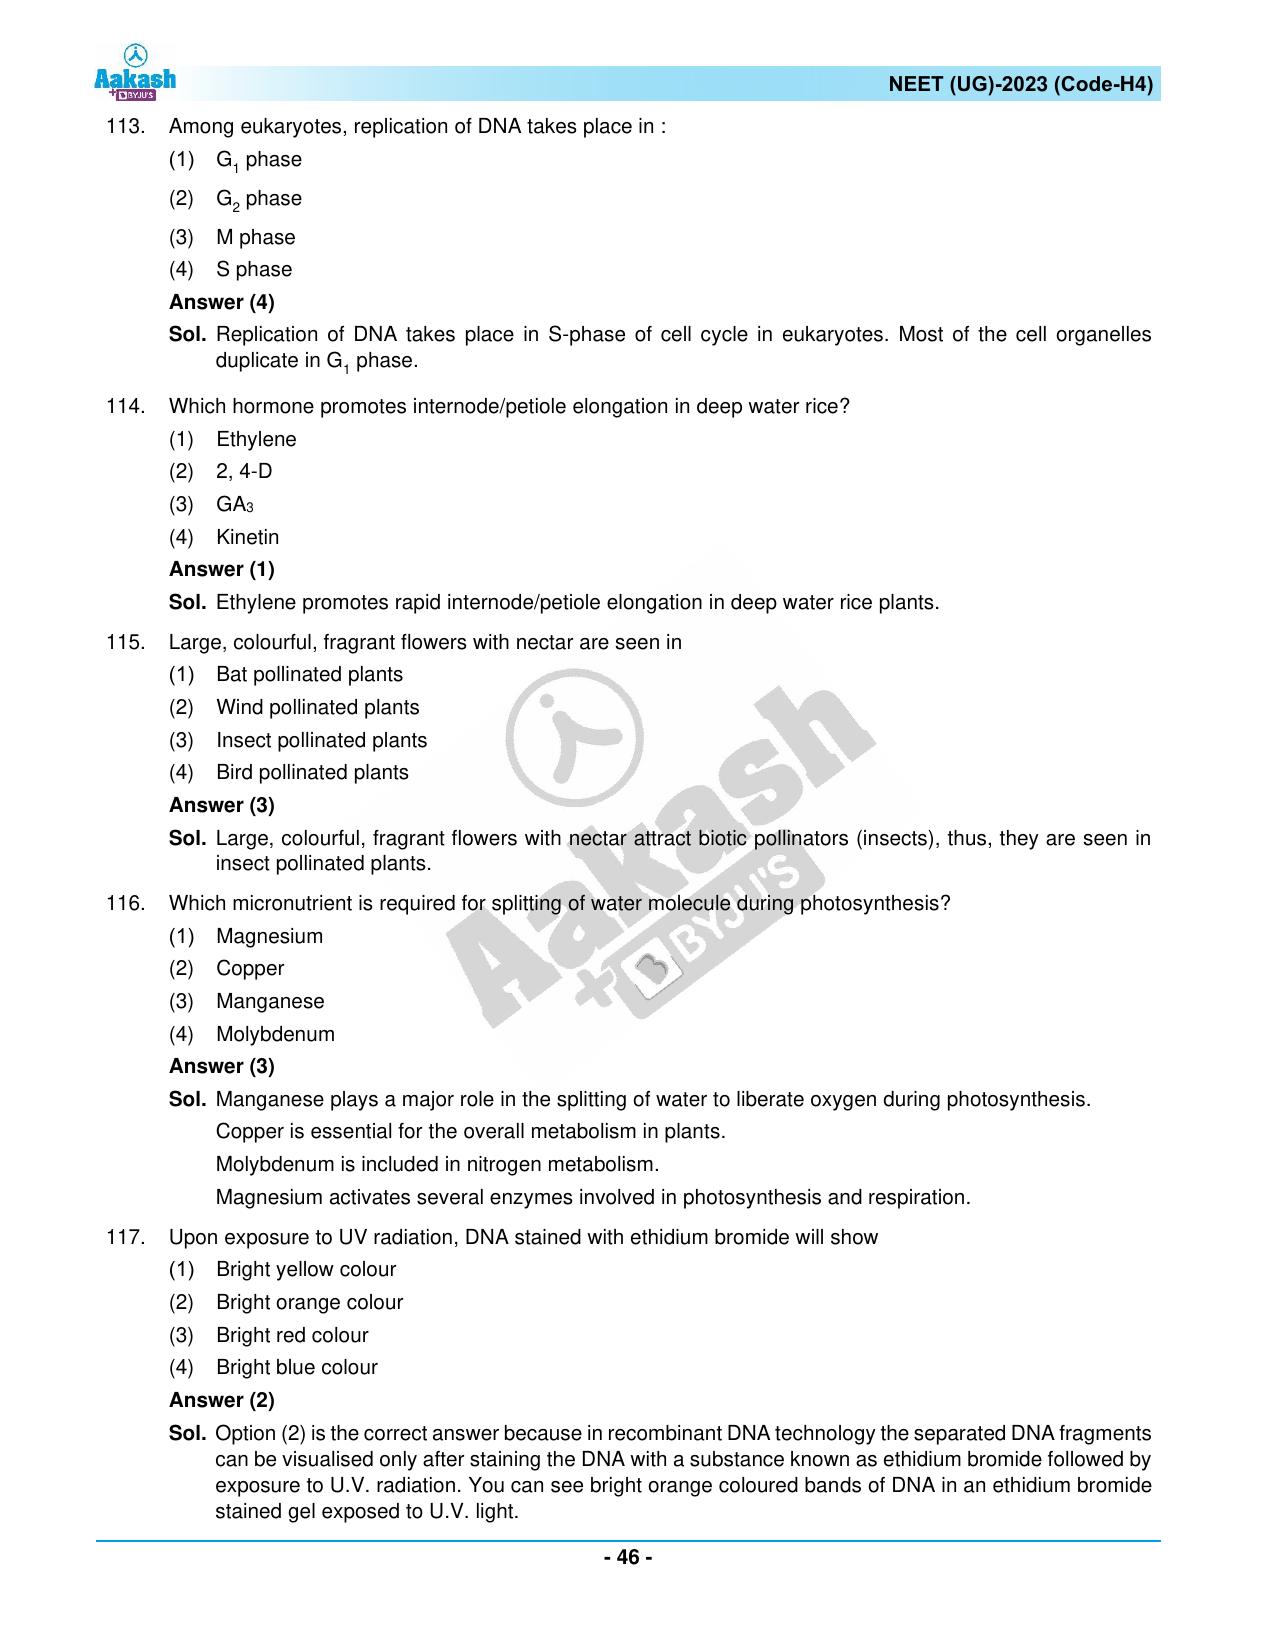 NEET 2023 Question Paper H4 - Page 46